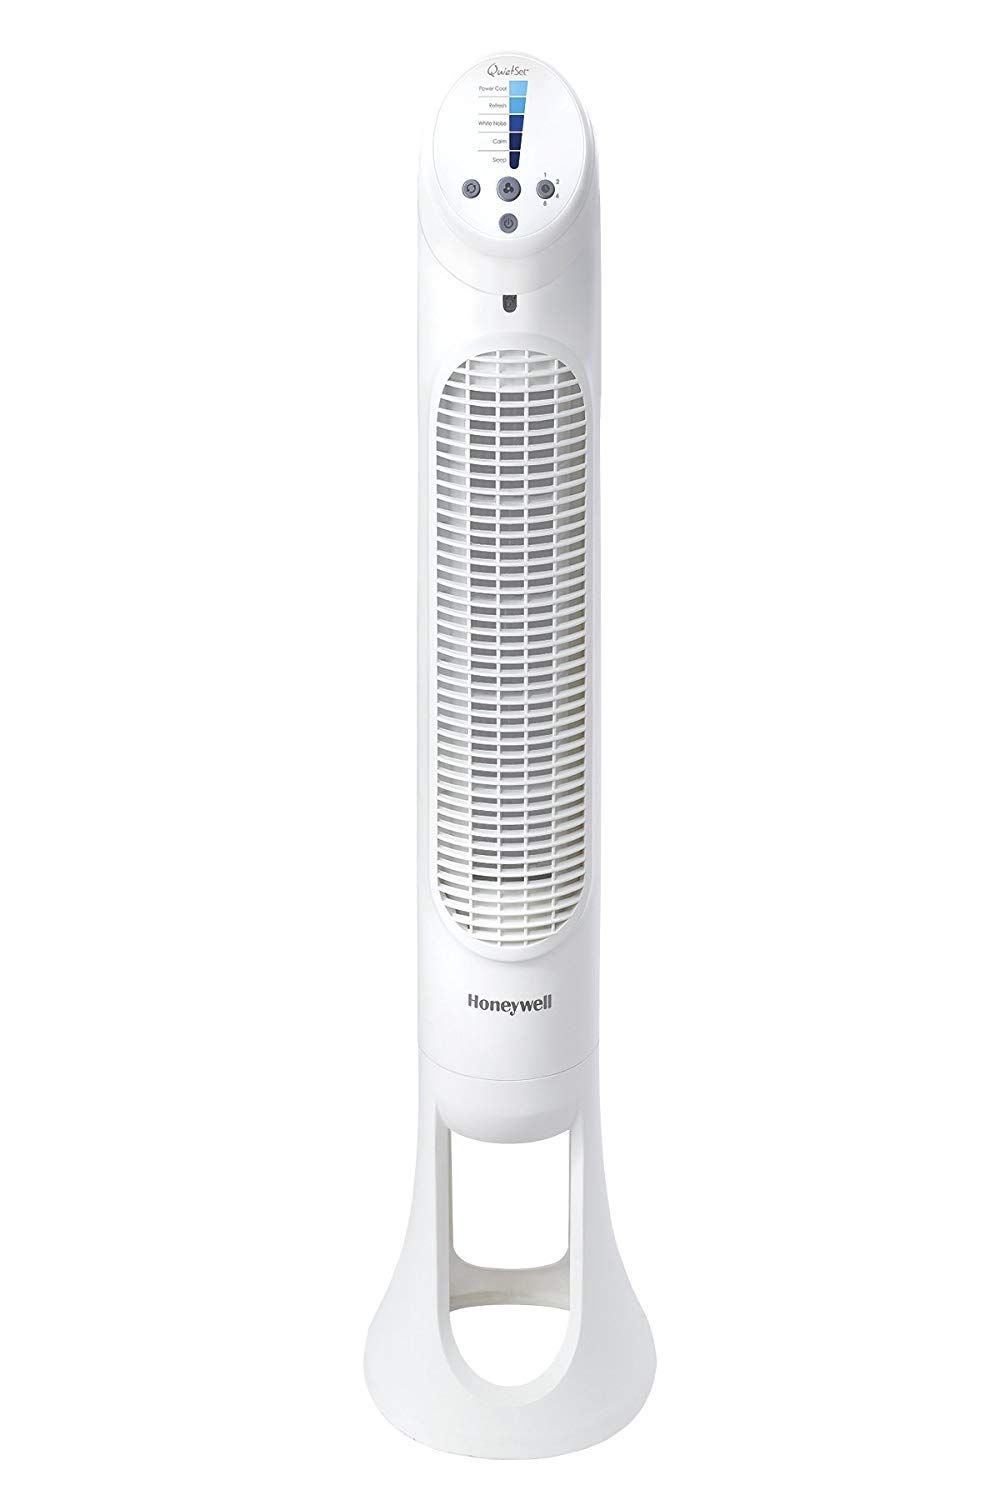 Oscillating Remote Control Tower Fan The Honeywell for measurements 1000 X 1500